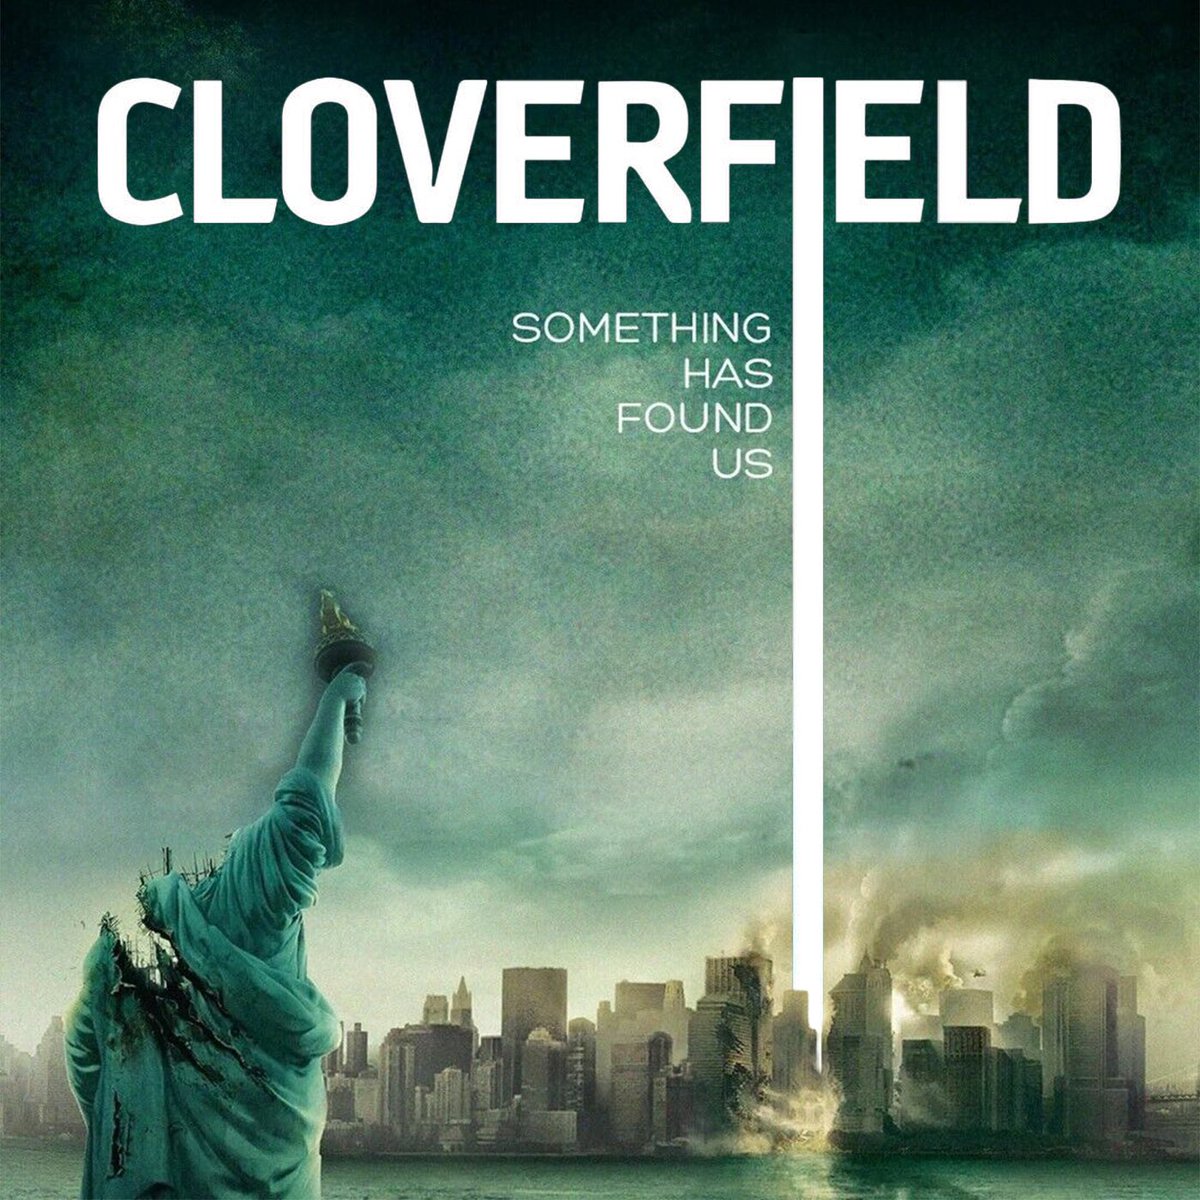 Tonight, as we continue Disaster Horror Month, we are forcing your Horror Virgin @toddjawesome to watch the original #Cloverfield. What part of this found footage film do you think will scare Todd the most?